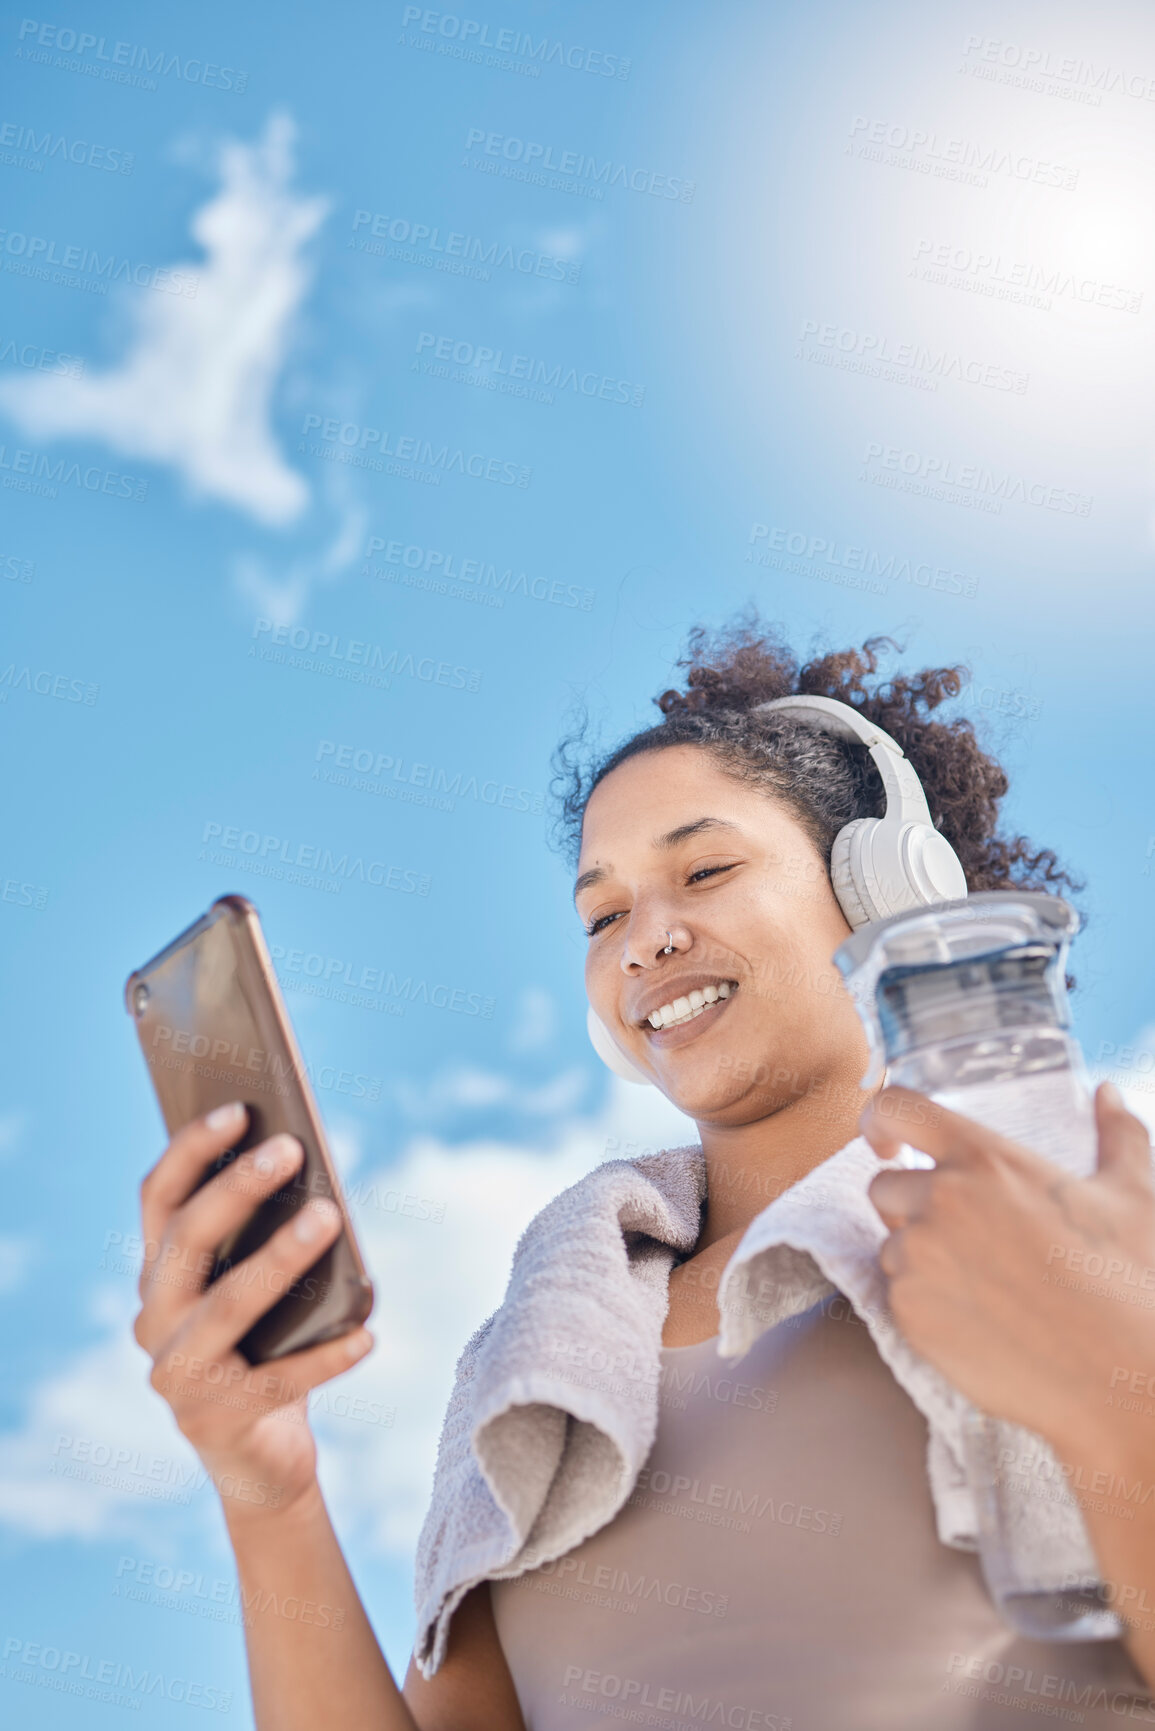 Buy stock photo Headphones, phone and woman with water bottle outdoors streaming music, radio or audio. Social media, networking and low angle of female on 5g mobile or text message after training or running workout